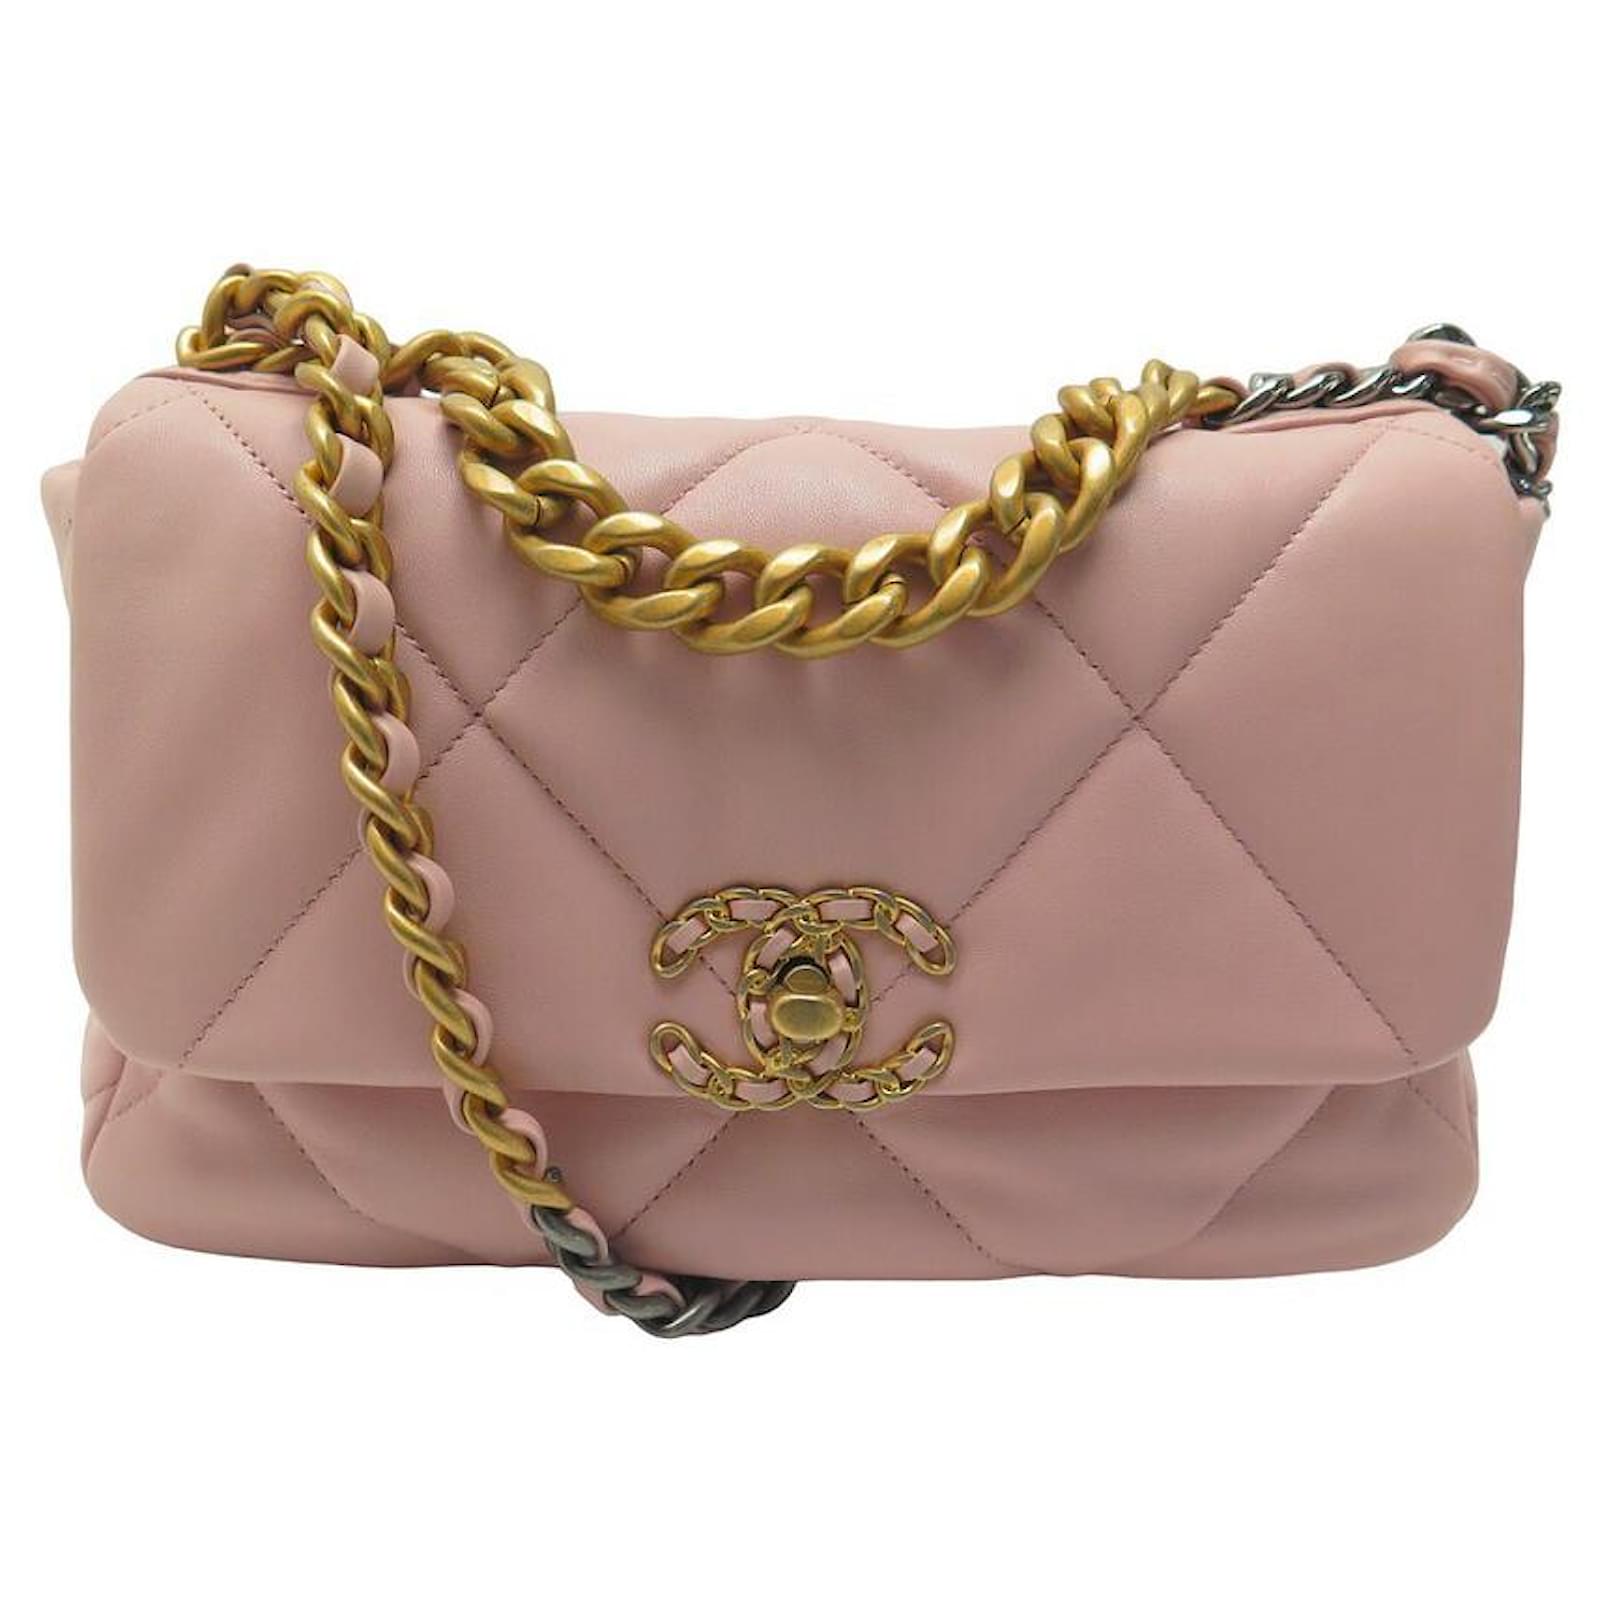 Chanel 19 NEW CHANEL HANDBAG 19 PINK QUILTED LEATHER PINK LEATHER